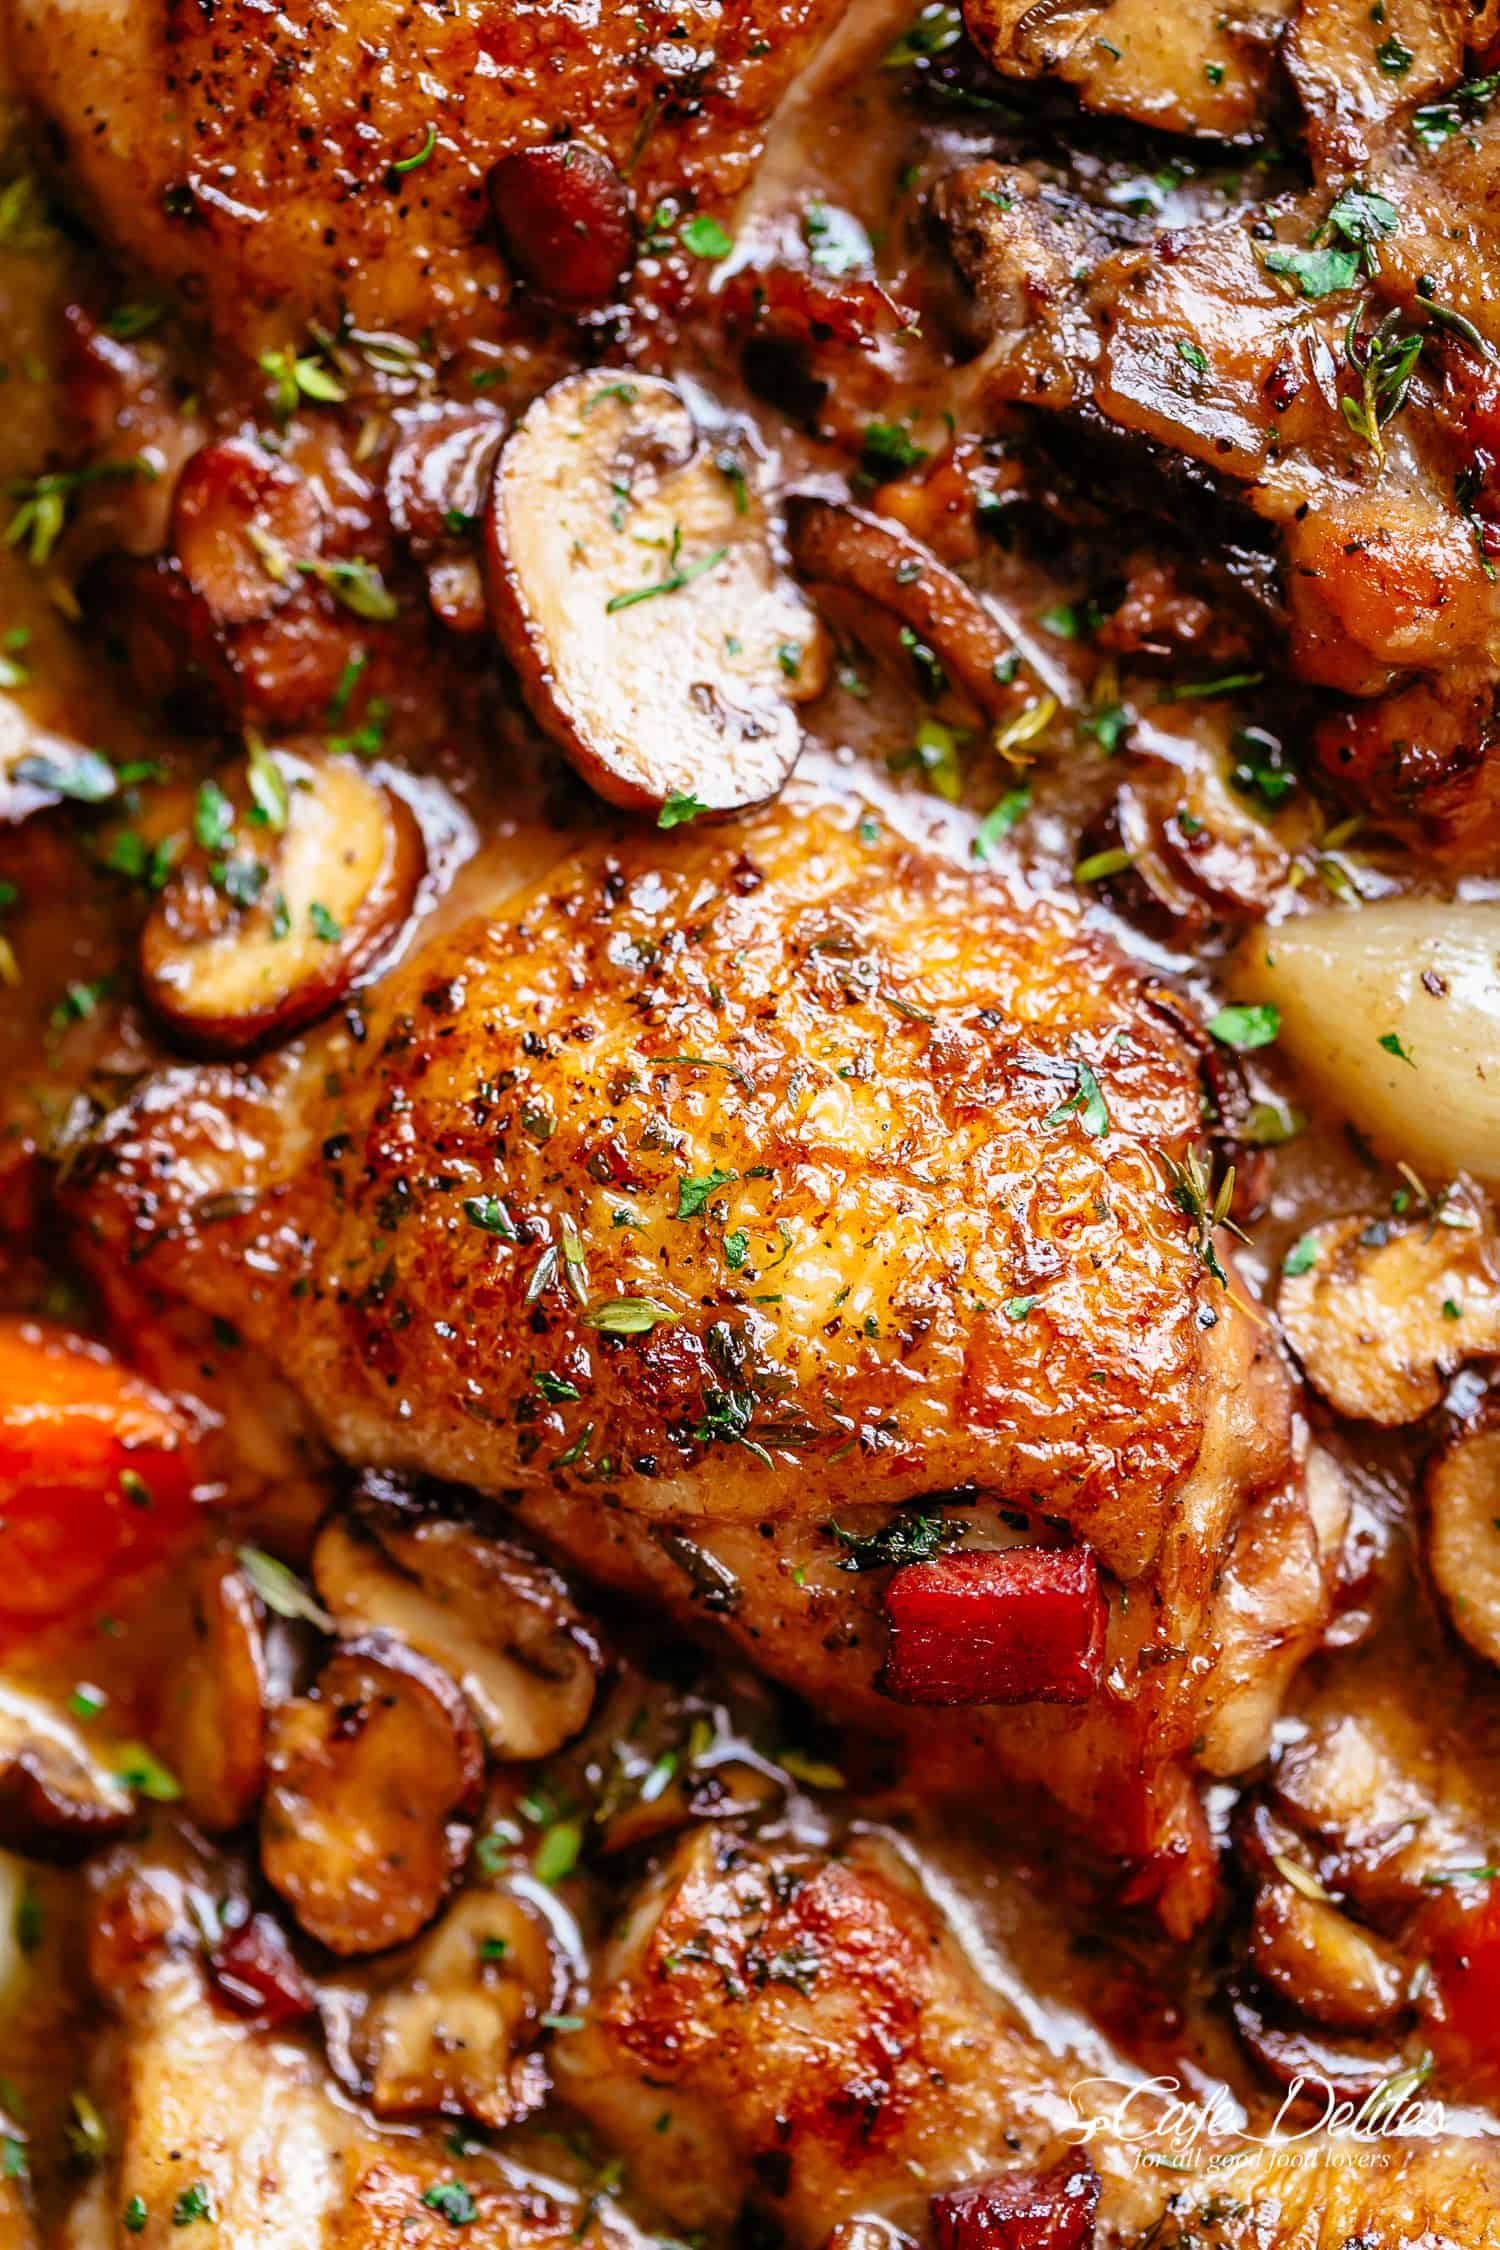 Coq Au Vin, or chicken in wine, is a popular classic French Chicken Stew made easy with crispy chicken pieces! An easy chicken recipe with crispy chicken drumsticks, chicken thighs and bacon, this Coq au vin gets everybody talking!